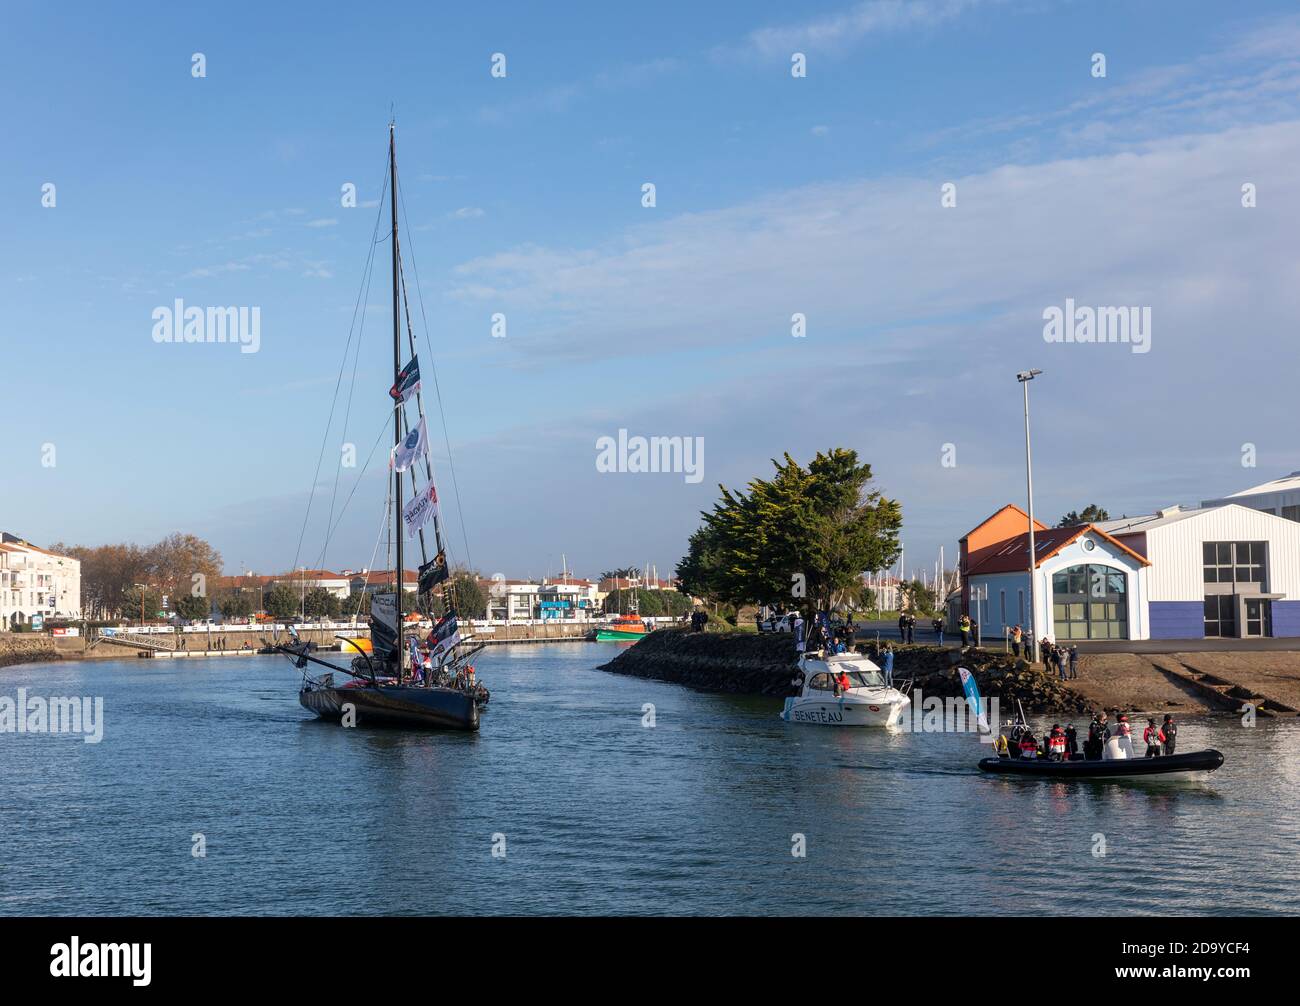 LES SABLES D'OLONNE, FRANCE - NOVEMBER 08, 2020: Alex Thomson boat (Hugo Boss) in the channel for the start of the Vendee Globe 2020 Stock Photo